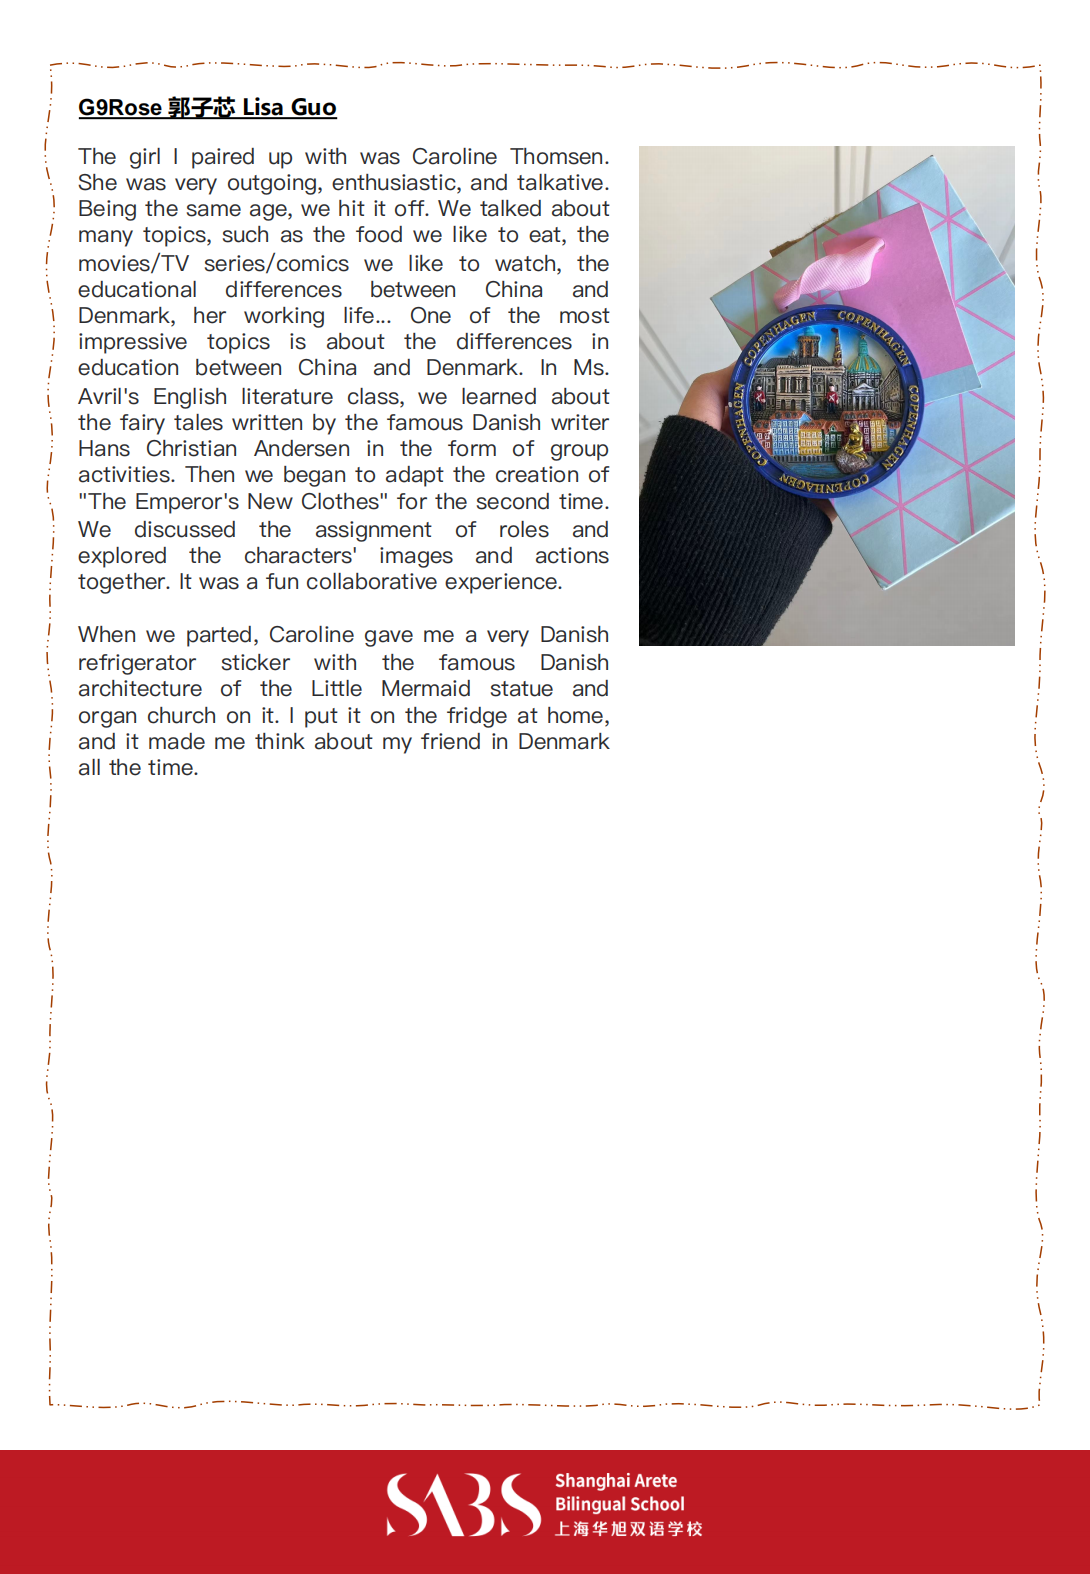 HS 4th Issue Newsletter pptx（English）_07.png